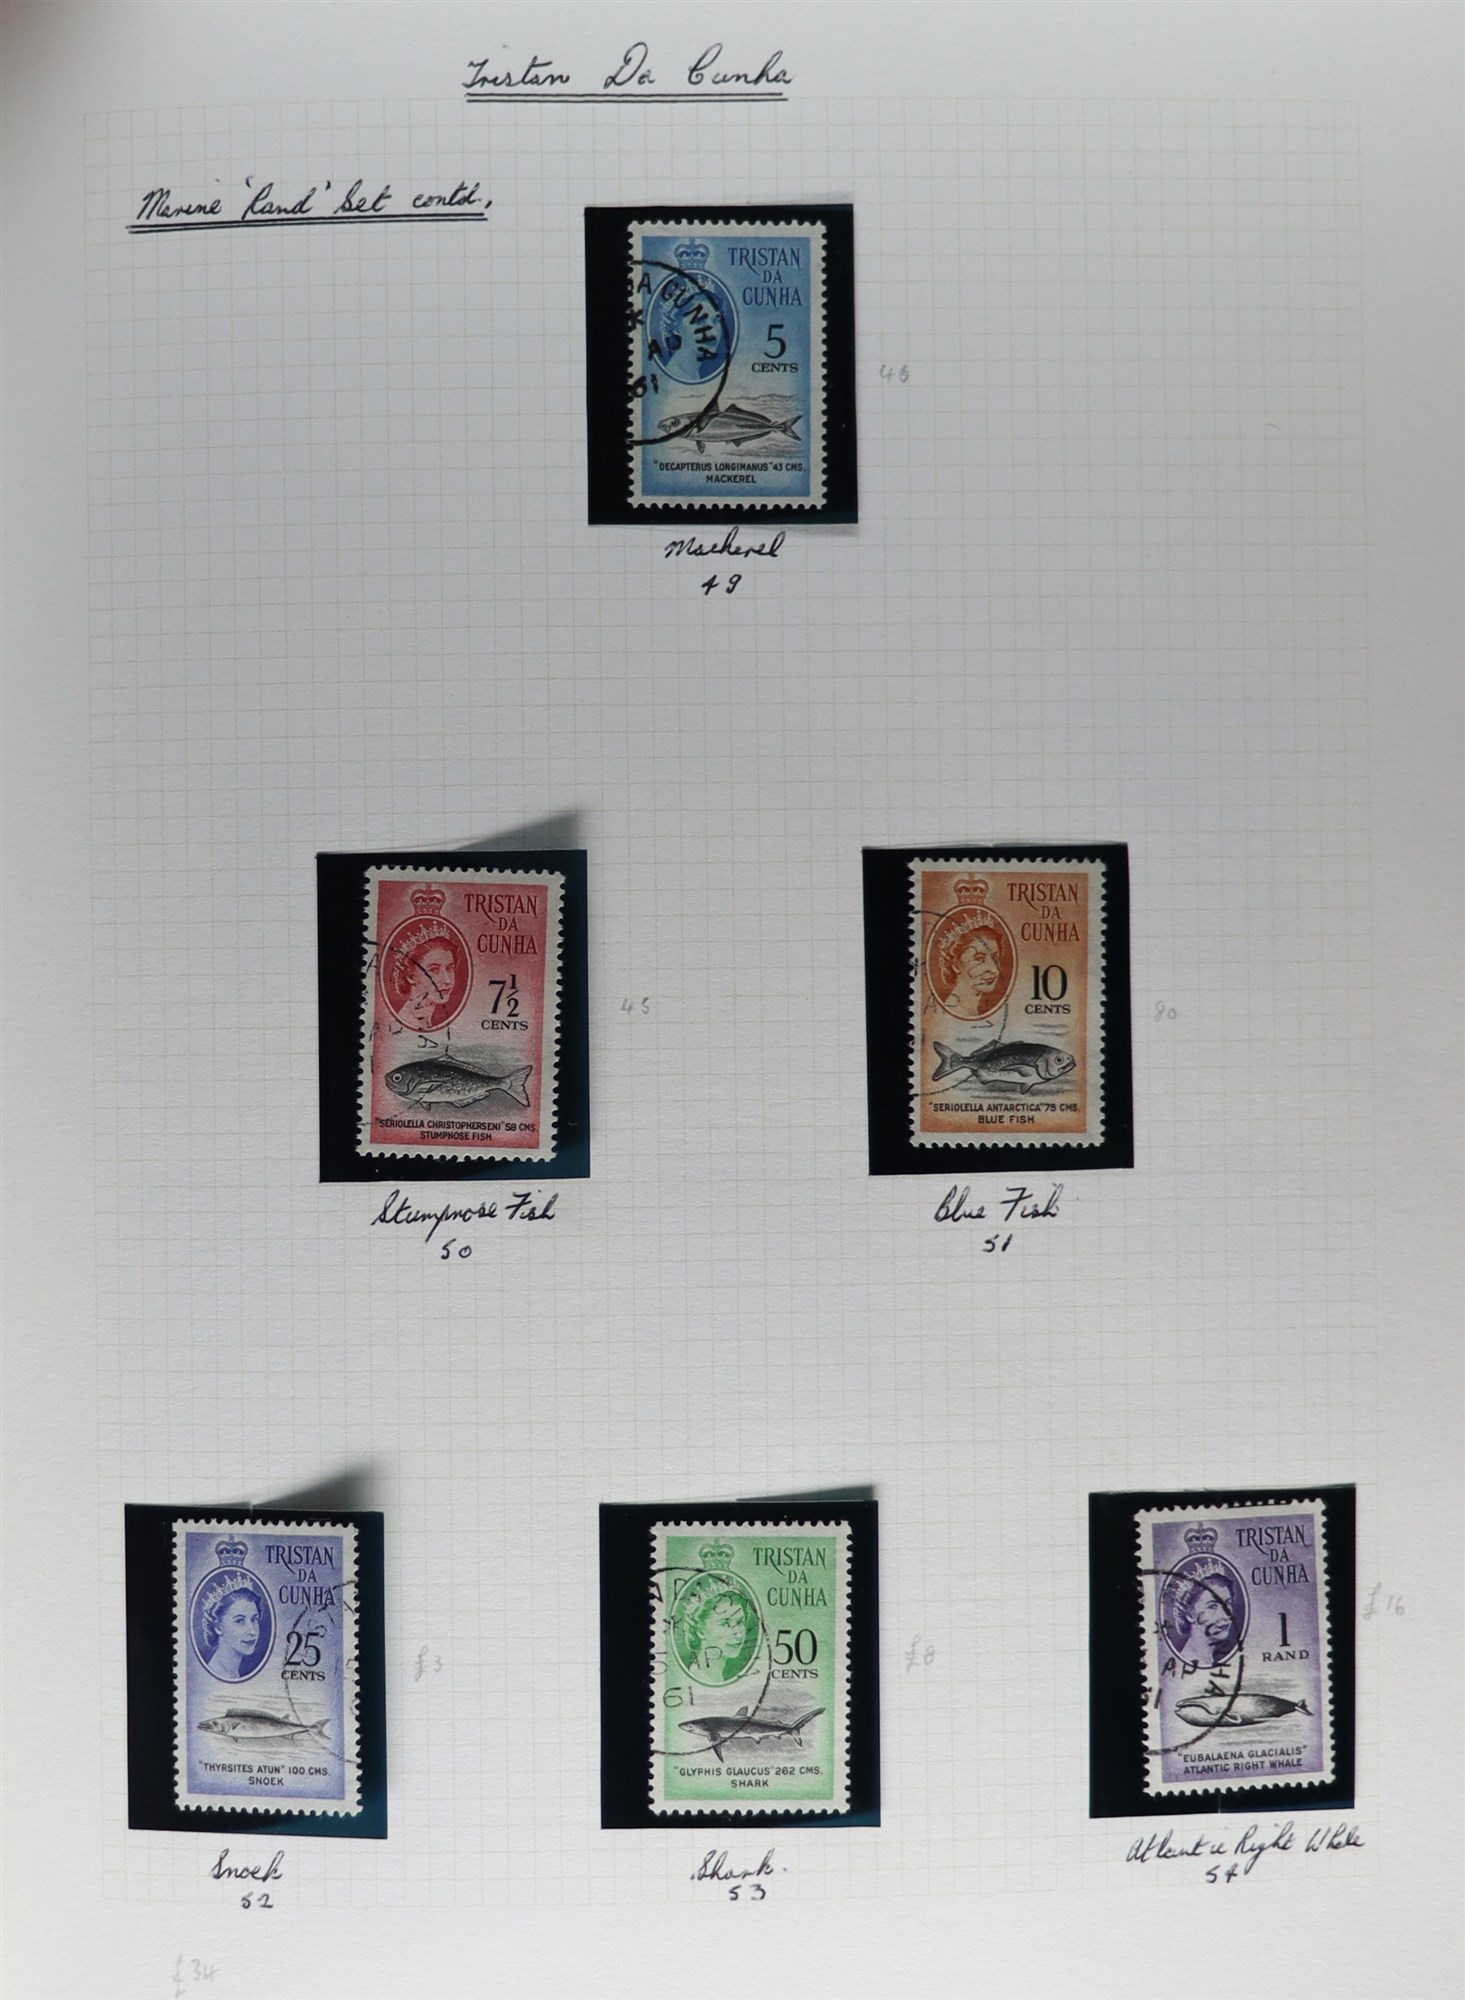 TRISTAN DA CUNHA 1952 - 2006 COLLECTIONS in six binders. Comprising of 1952 - 1980 in album - Image 11 of 13